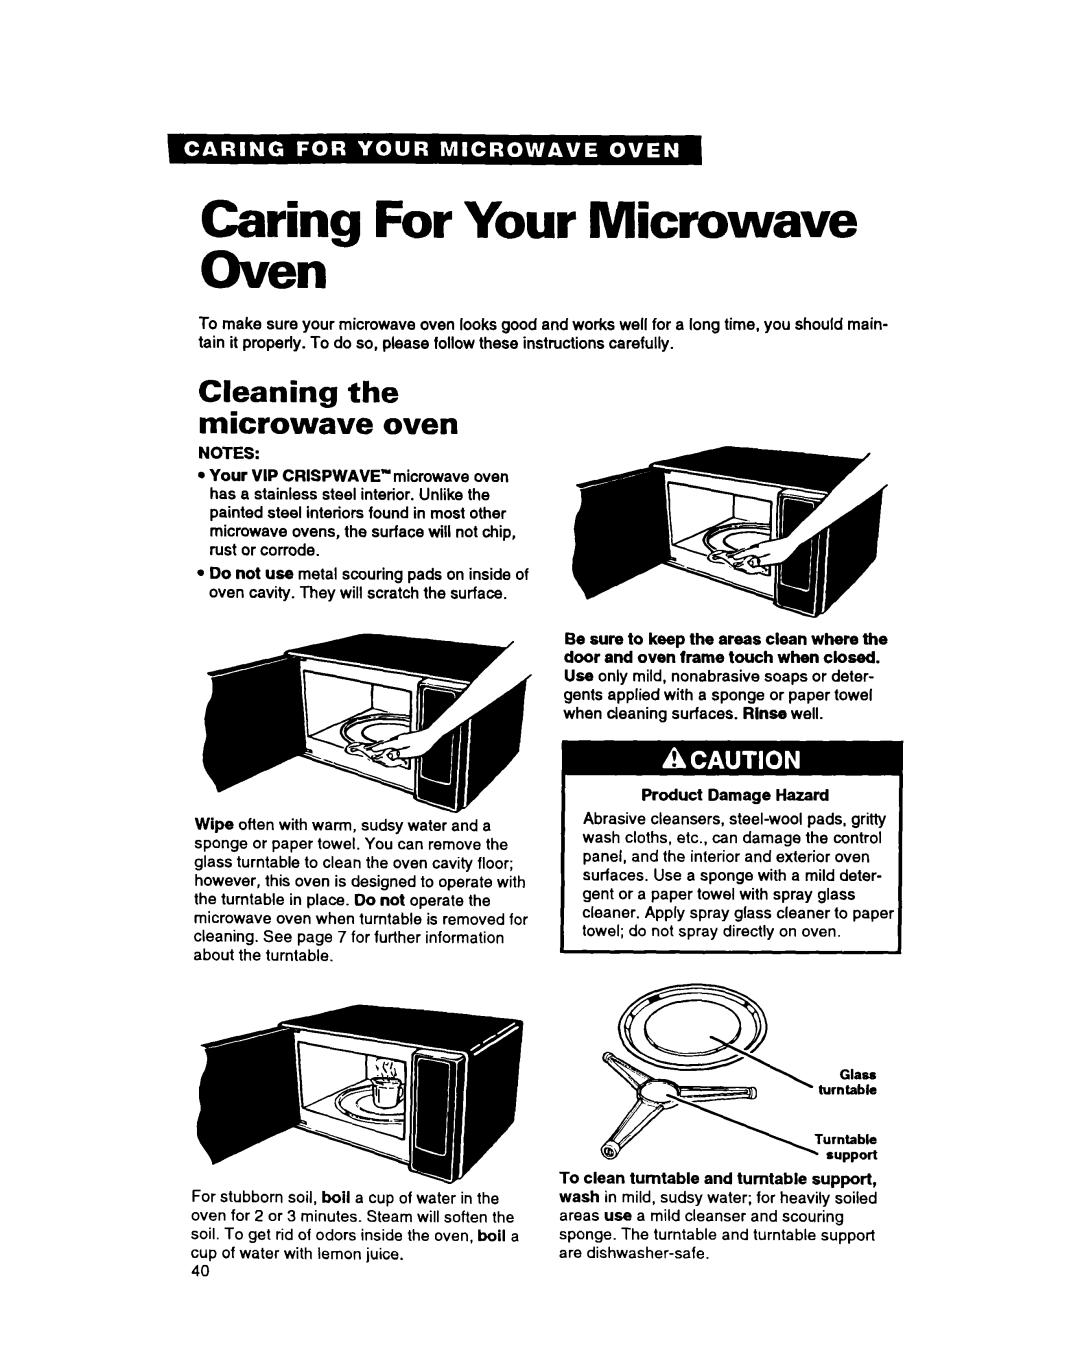 Whirlpool MG207OXAQ, MG207OXAB Caring For Your Microwave Oven, Cleaning the microwave oven, Product Damage Hazard, Notes 